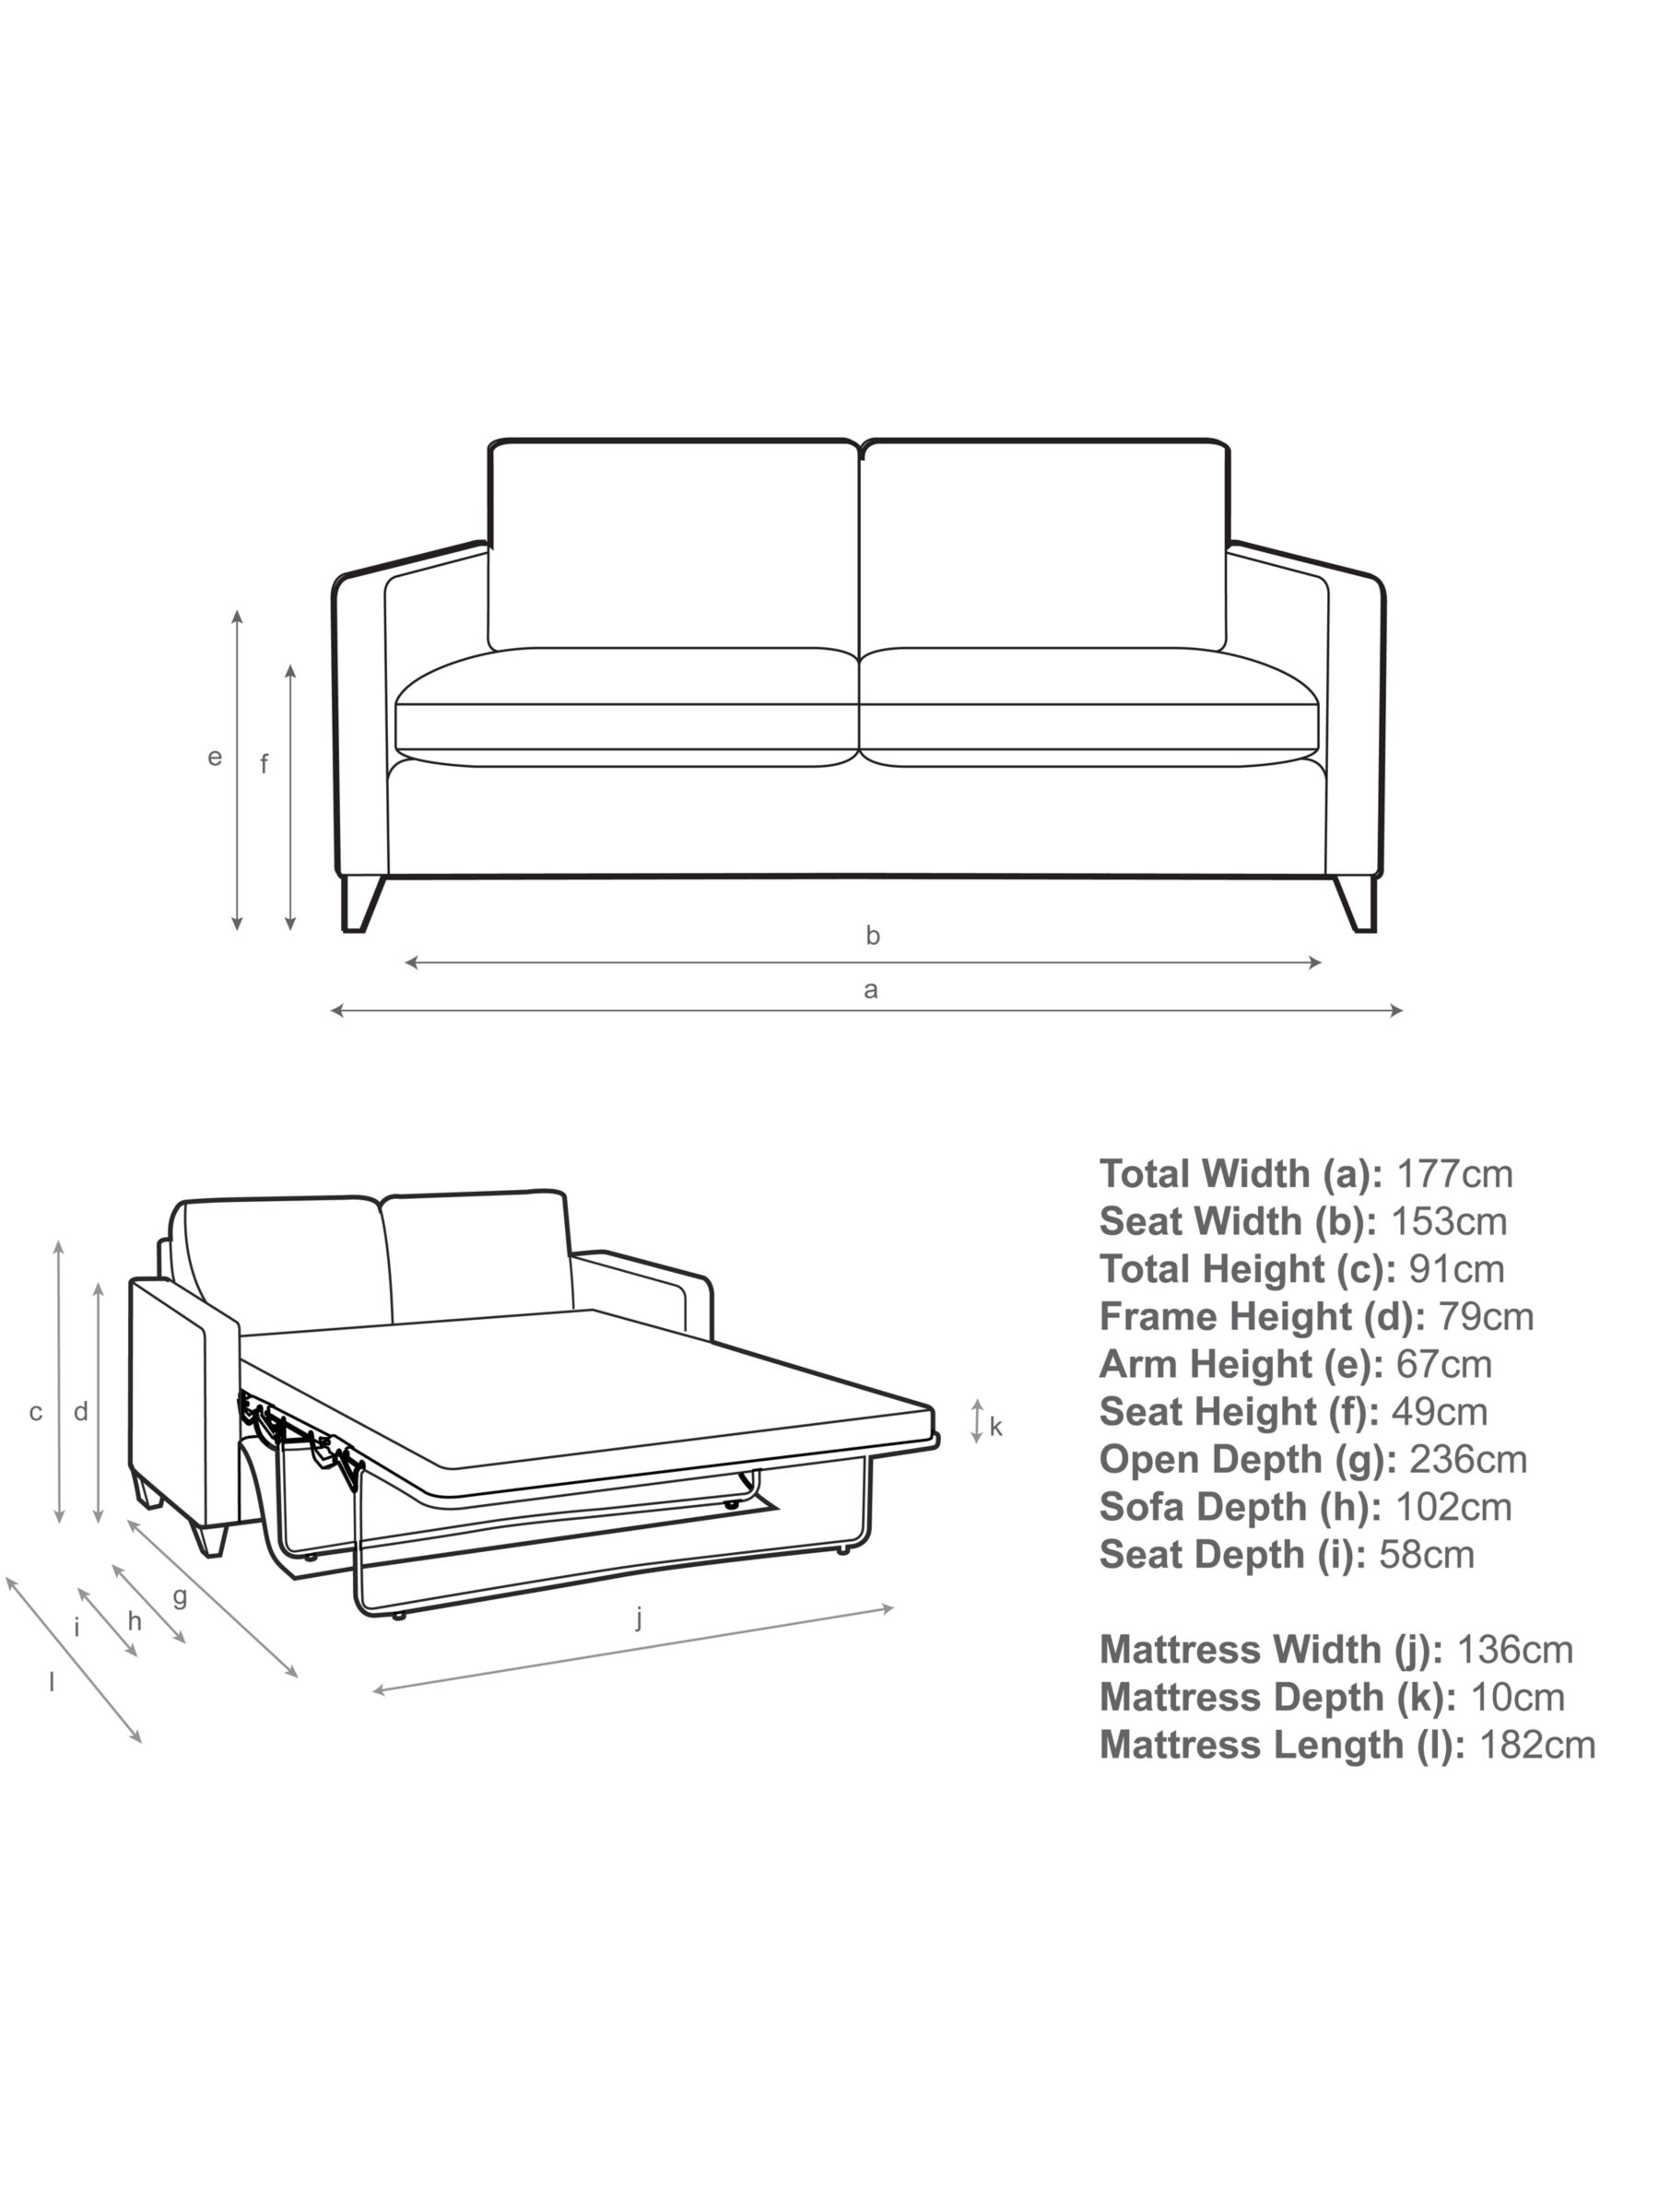 Is a 2 Seater Sofa Bed a Double Bed?